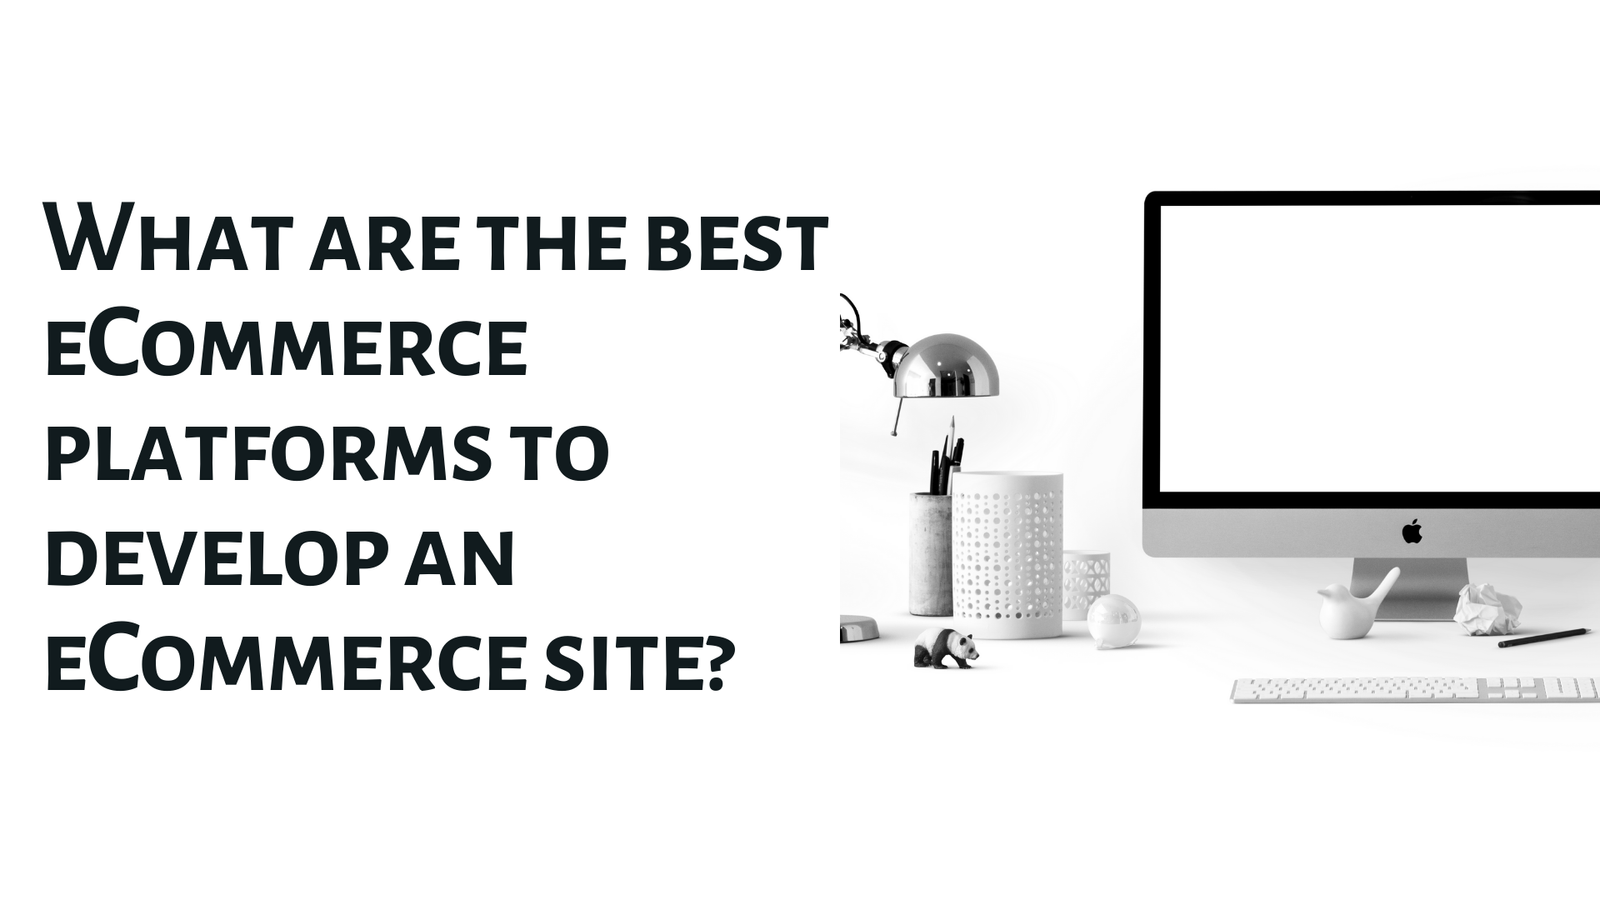 What are the best eCommerce platforms to develop an eCommerce site?